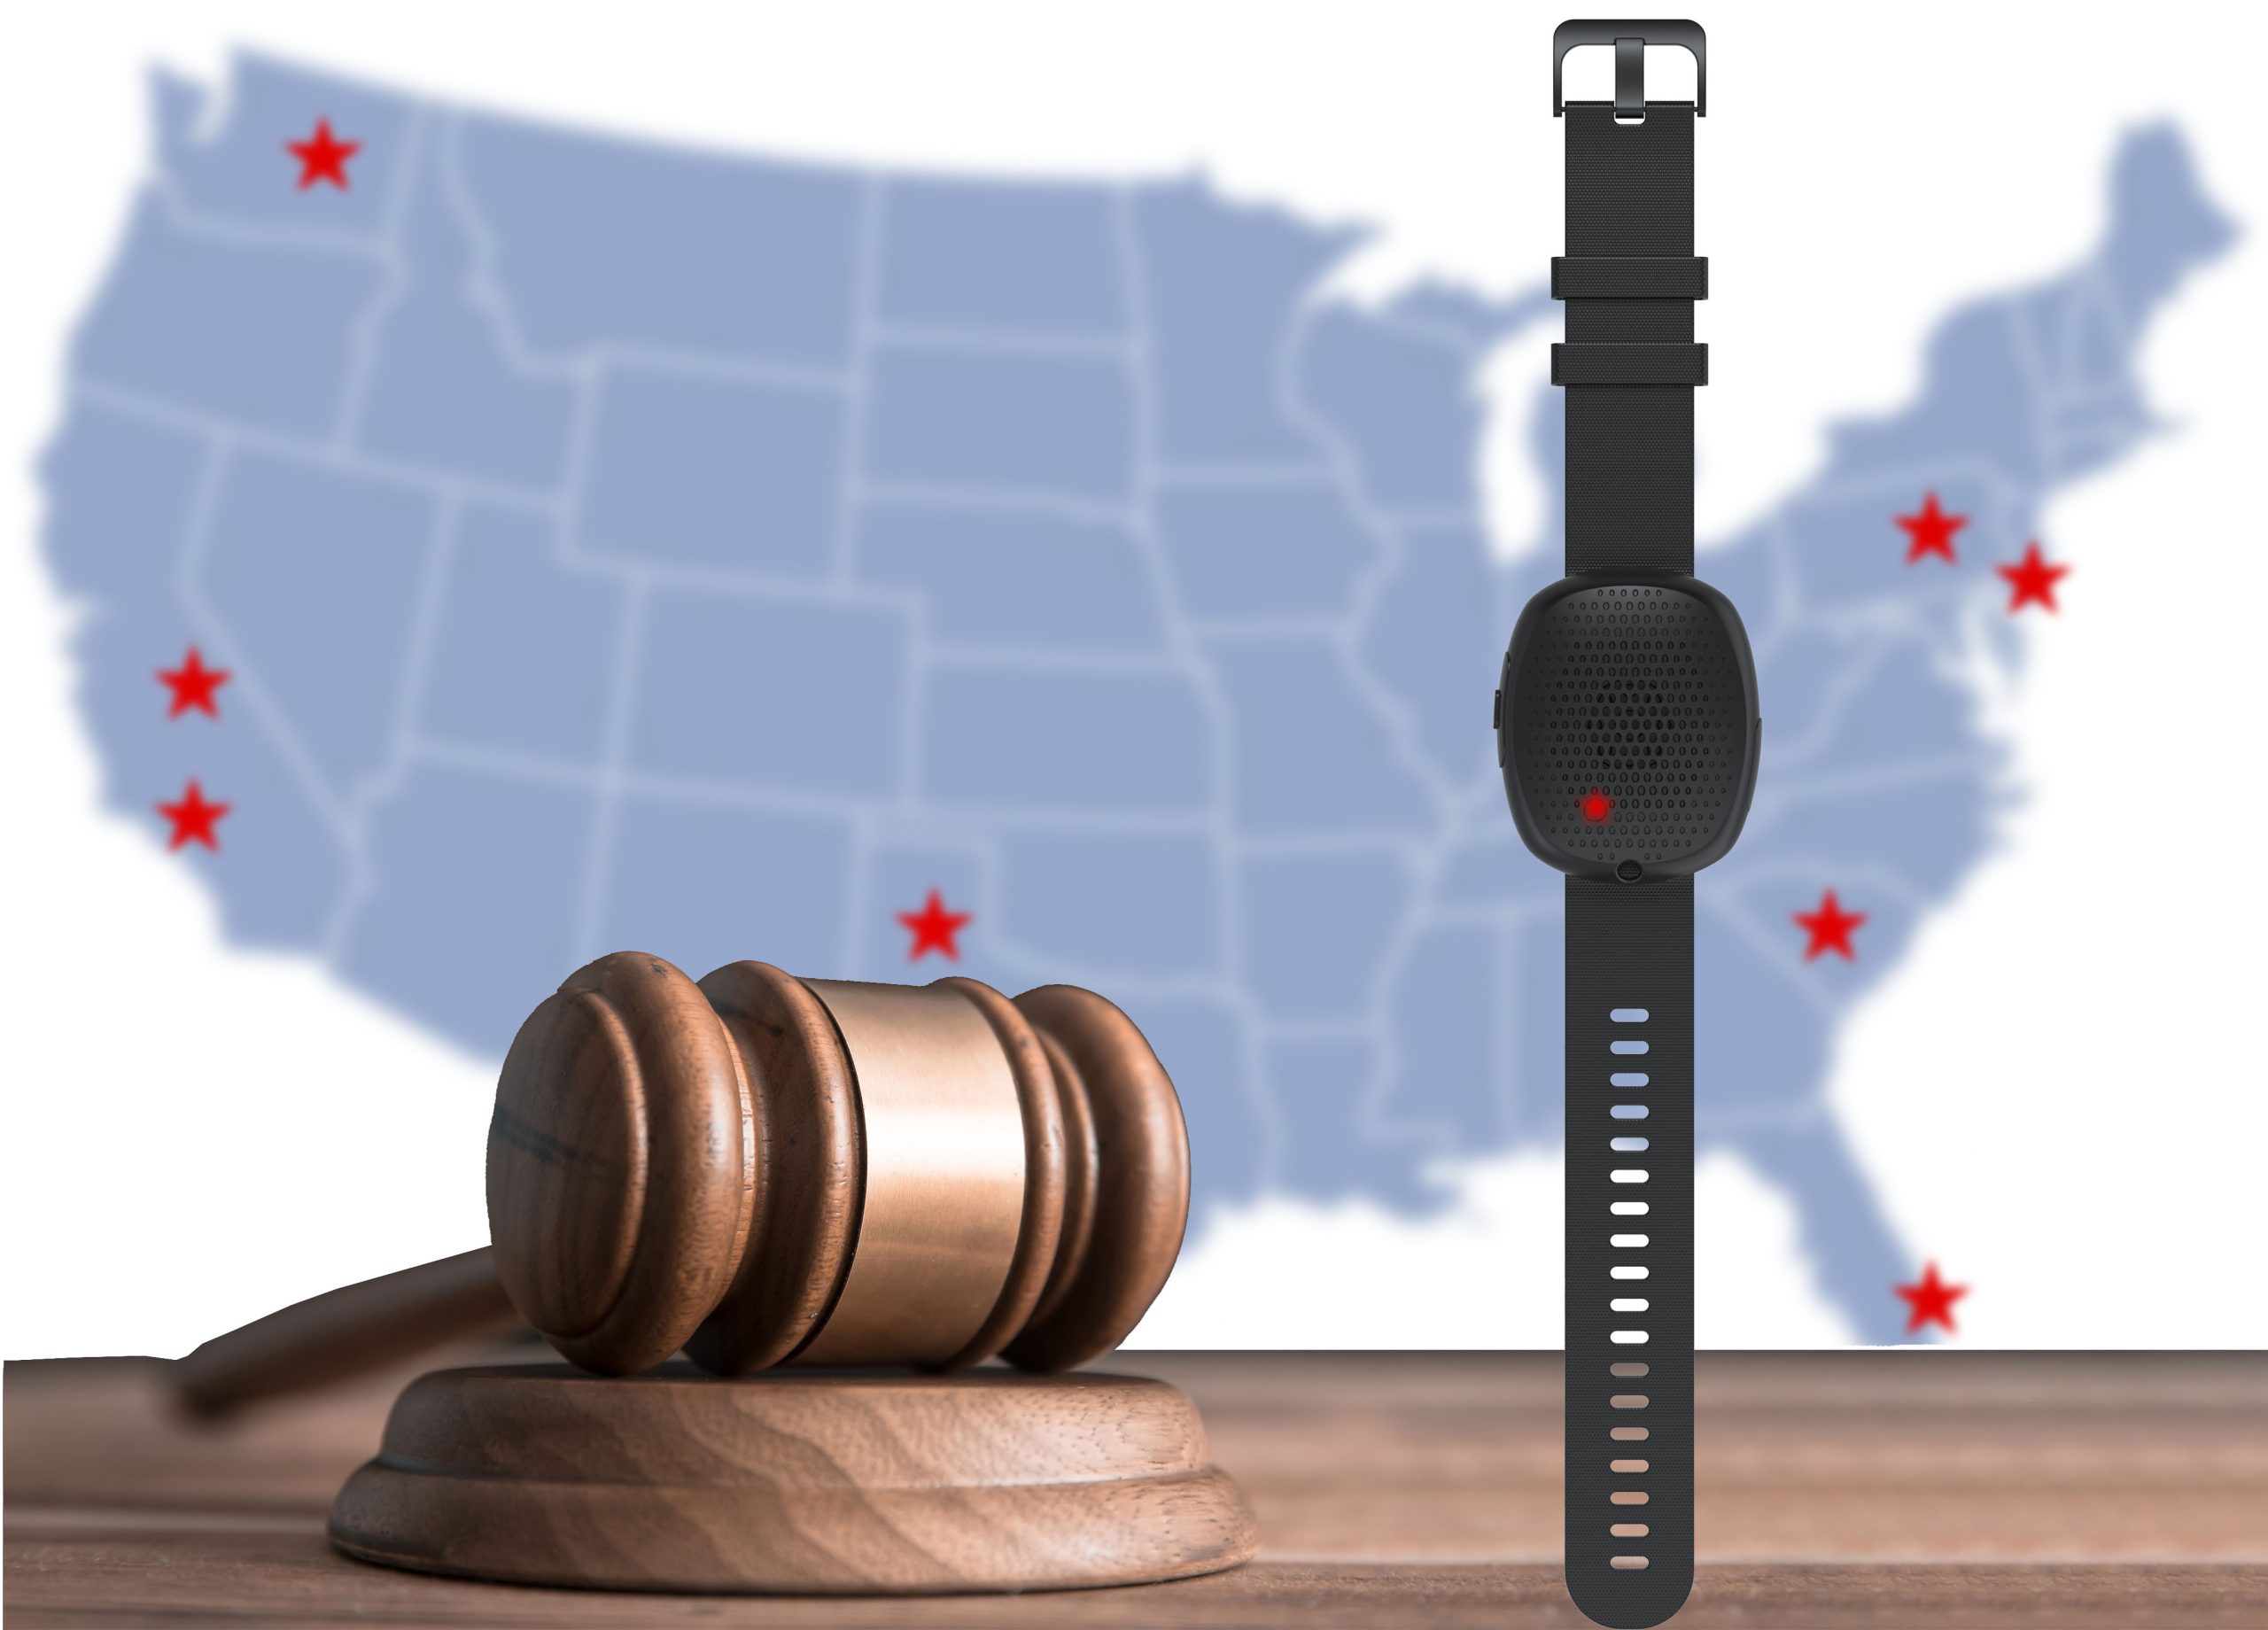 A silent beacon with wristband in the foreground with a legal gavel sitting on its side. In the background a map of the US with red stars over states that require panic buttons.